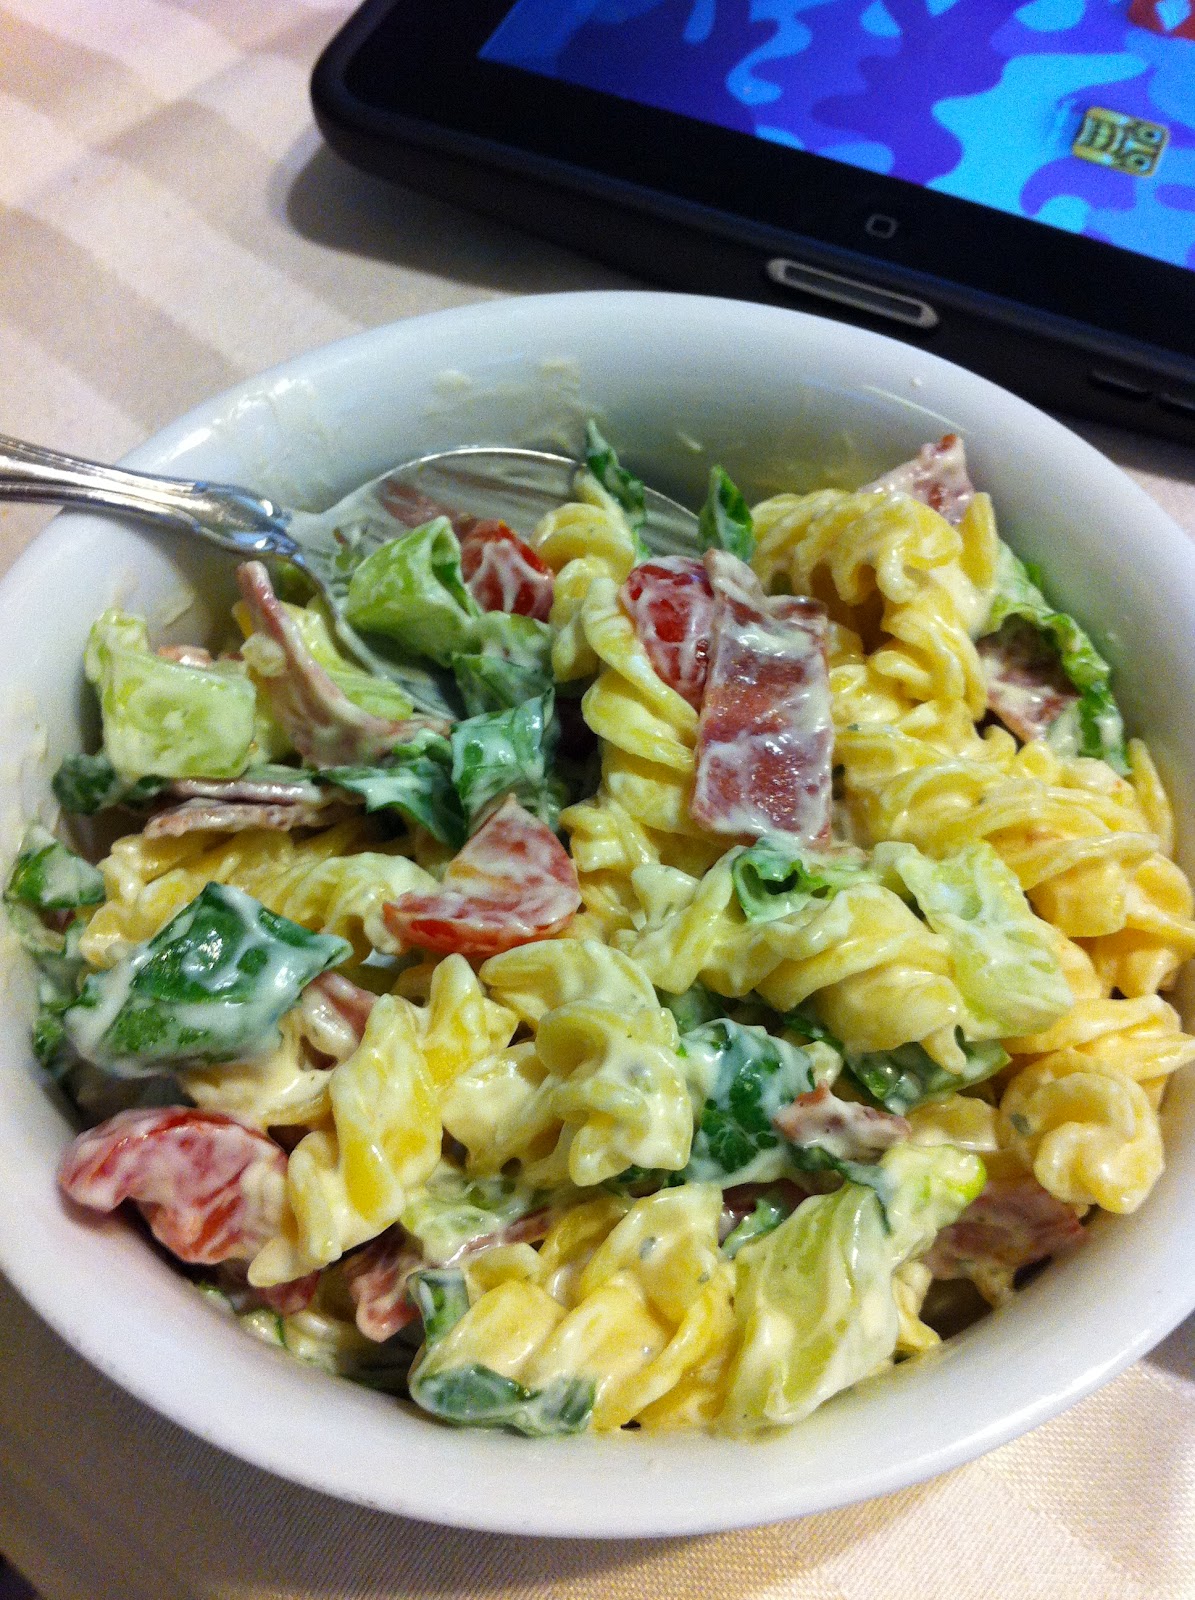 Can You Eat This?: BLT Pasta Salad